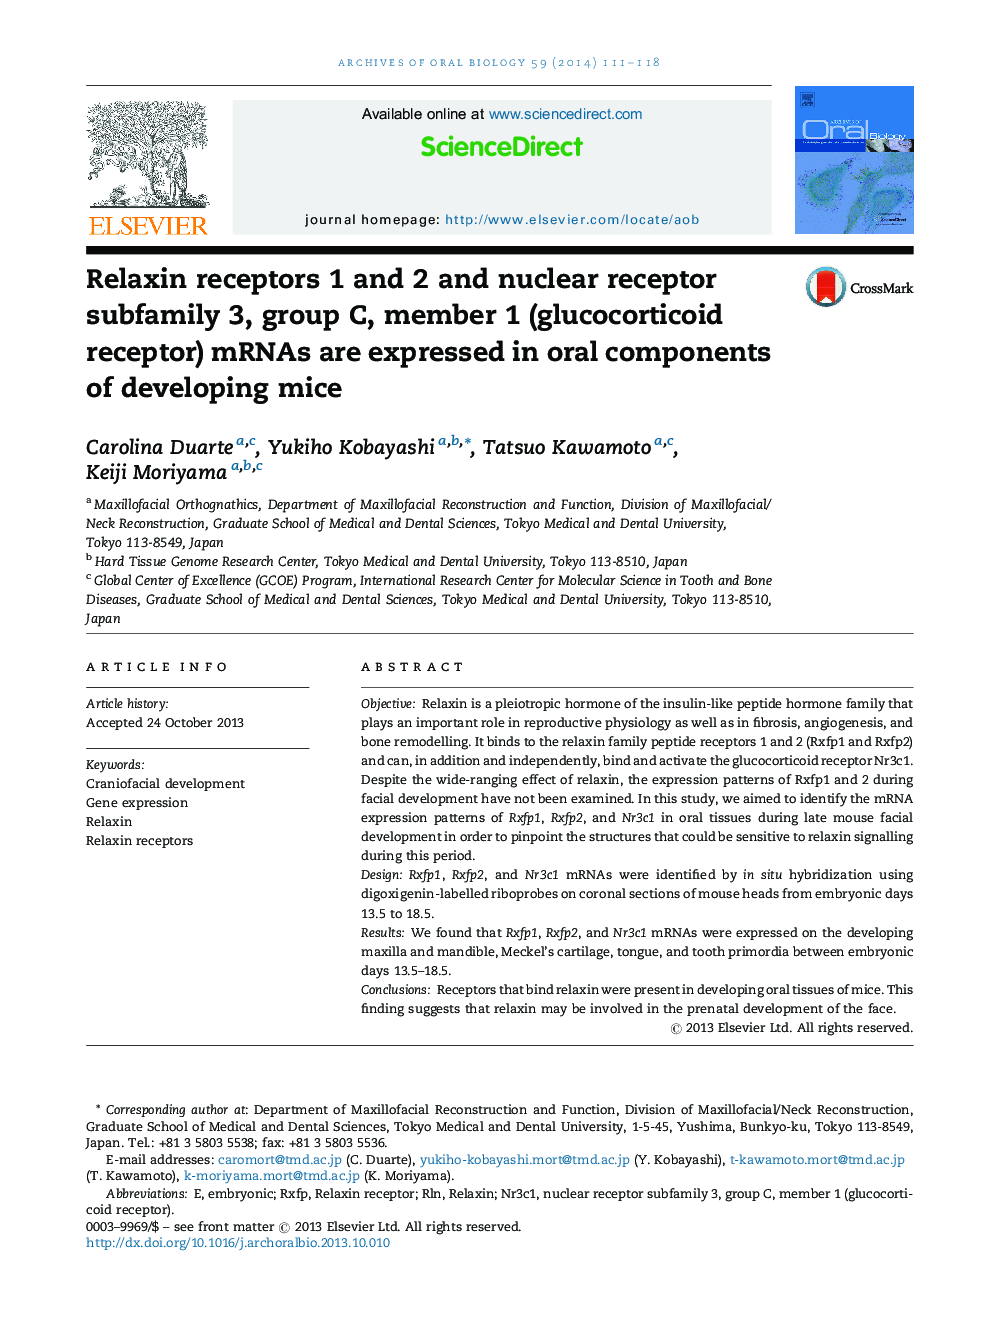 Relaxin receptors 1 and 2 and nuclear receptor subfamily 3, group C, member 1 (glucocorticoid receptor) mRNAs are expressed in oral components of developing mice